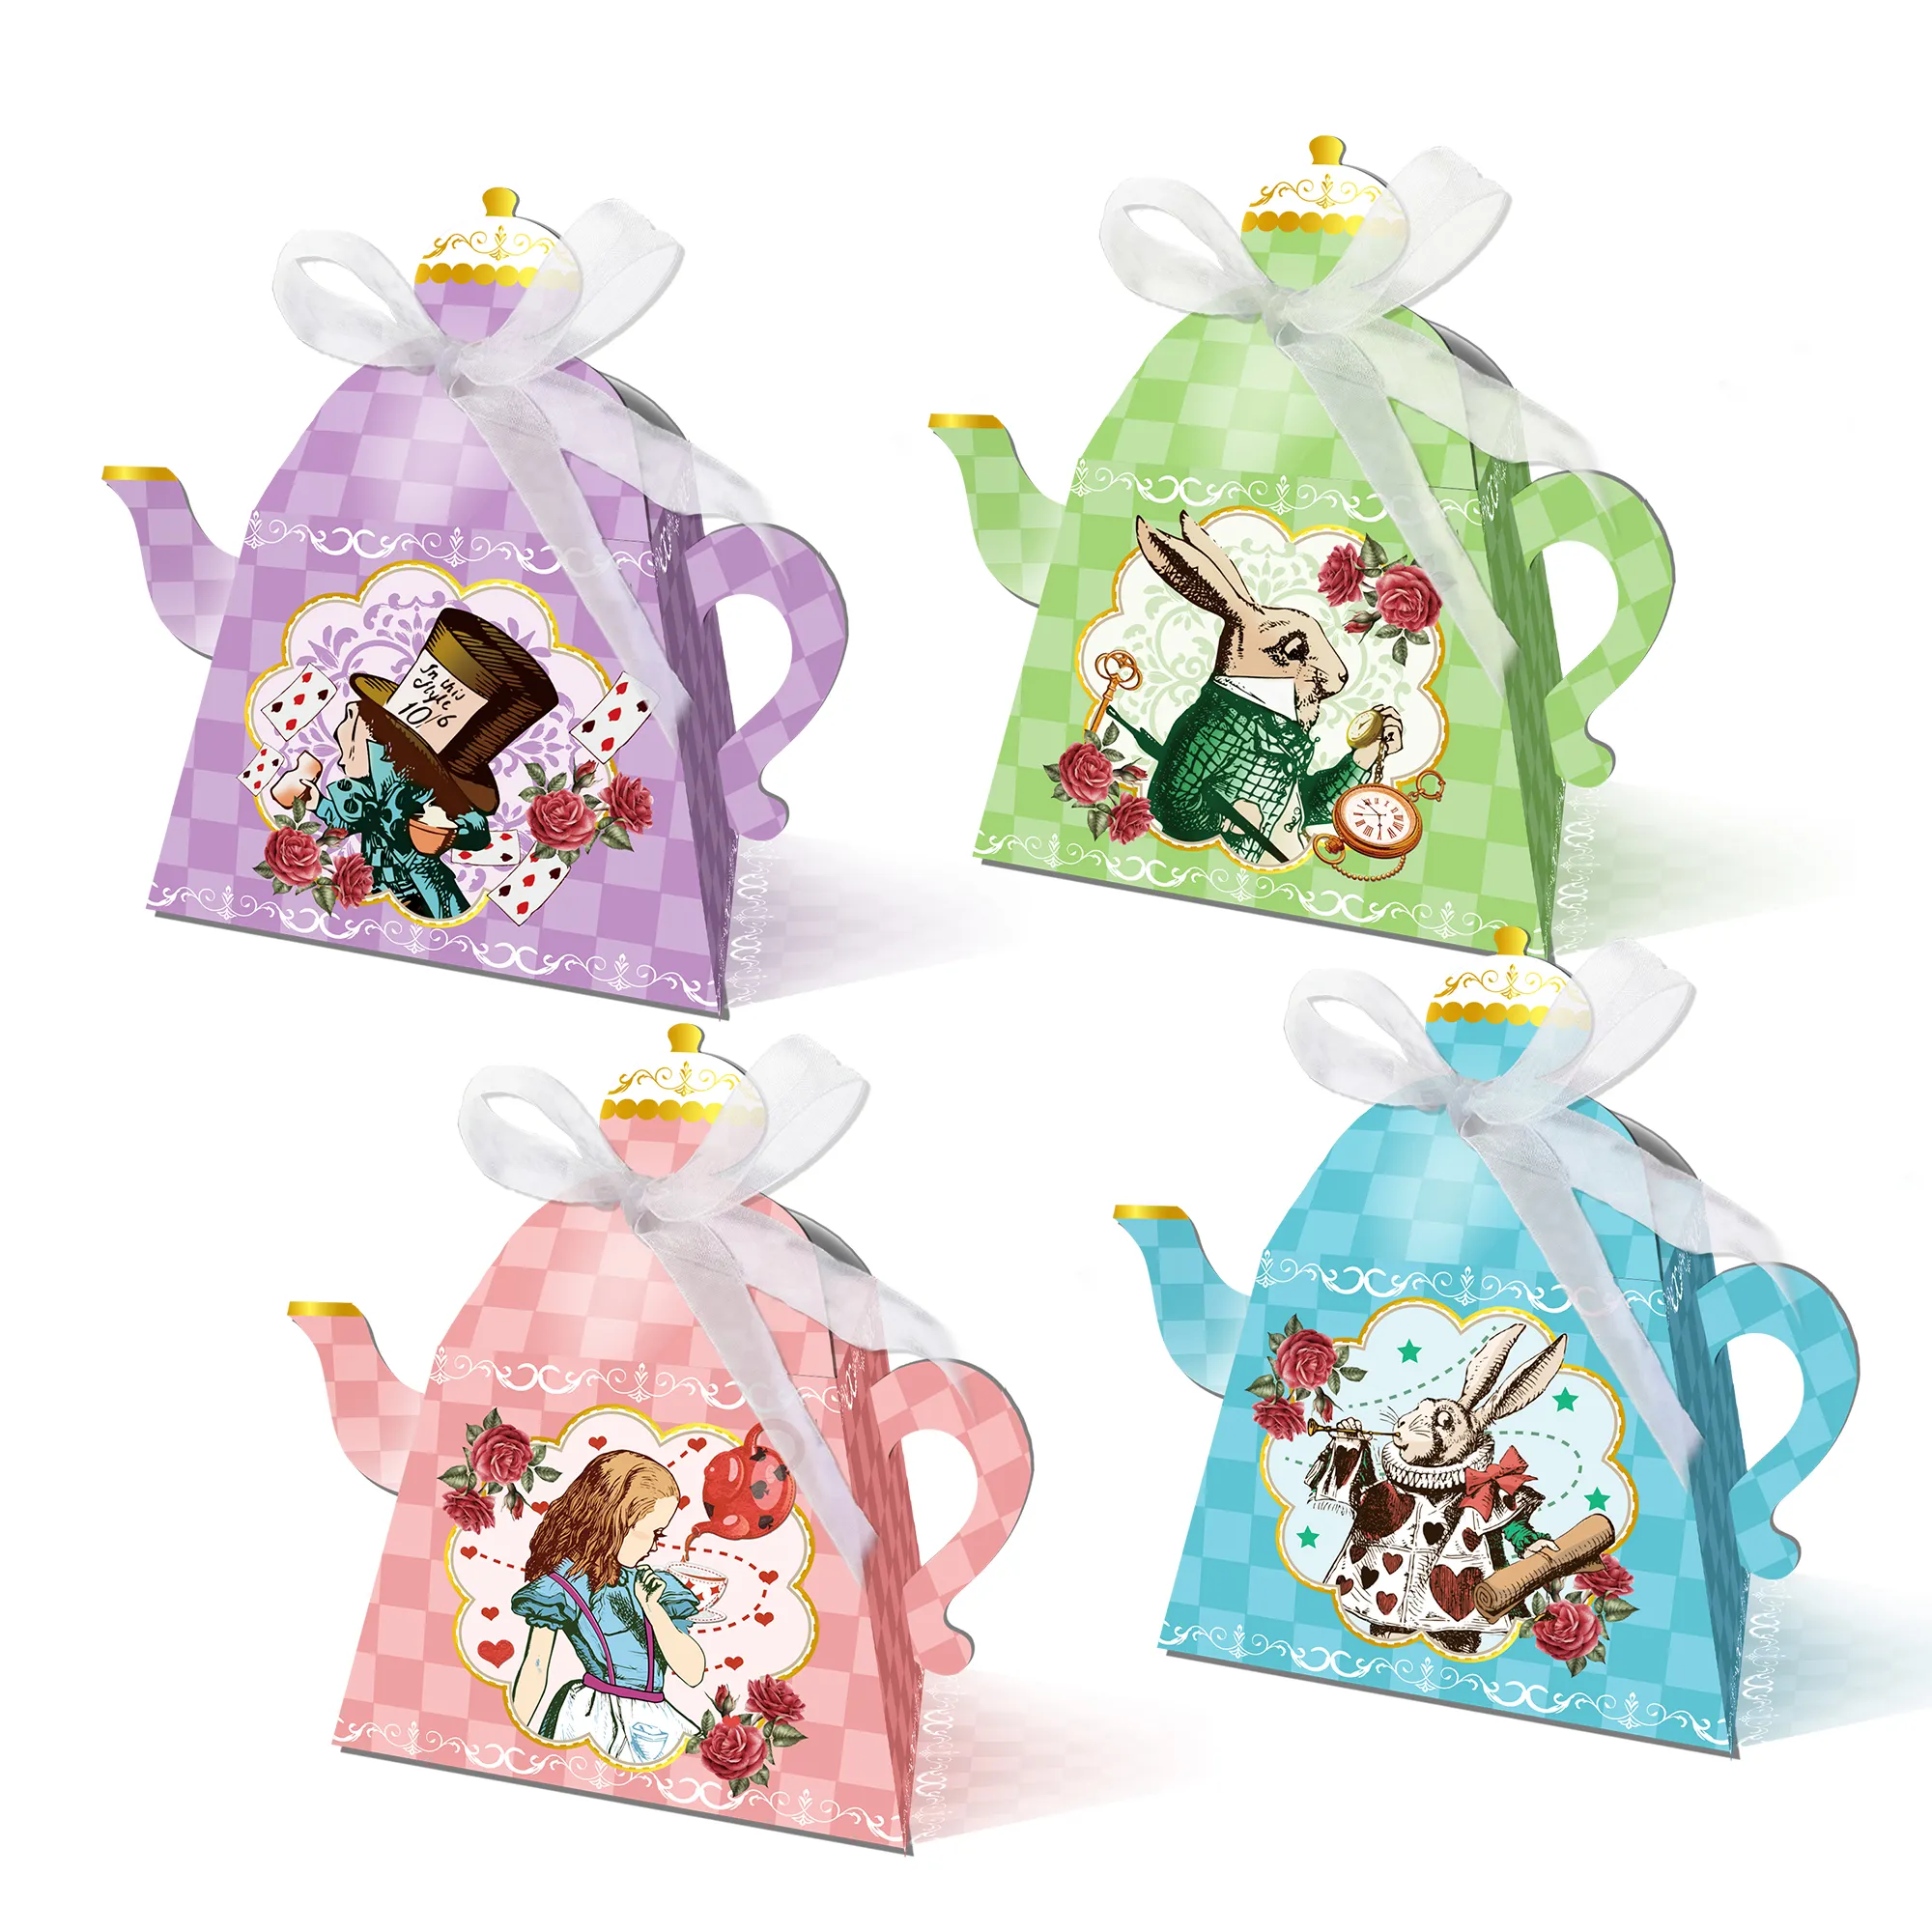 Alice's Adventures Teapot Tea Party Favor Box Gift Paper Boxes Set of 12 Cookie Candy Boxes with Ribbon for Party Decorations